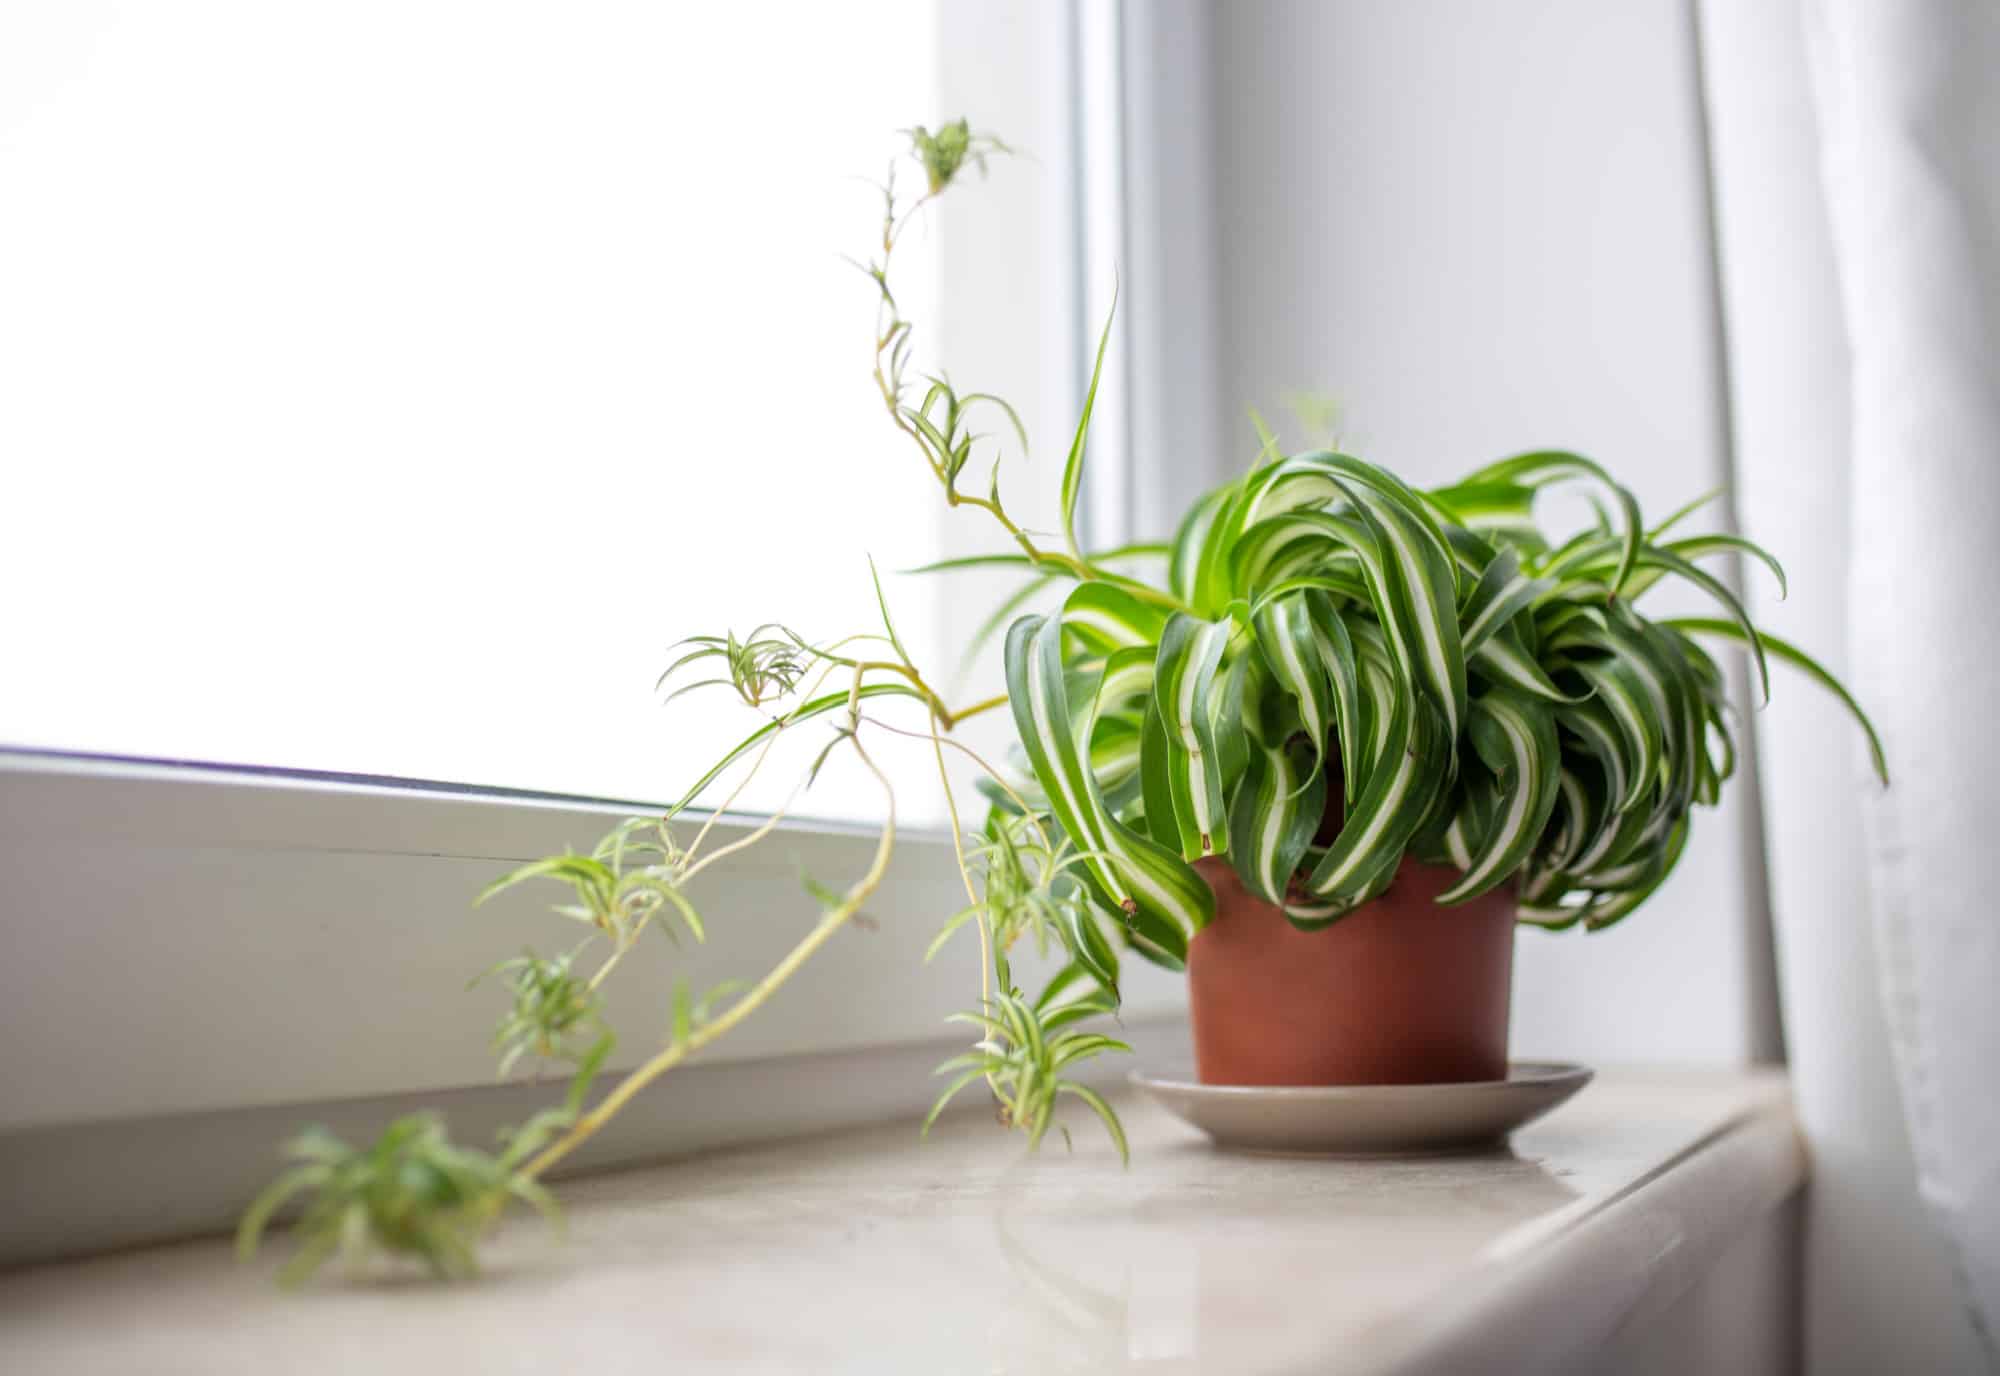 spider plant on the sill in the bathroom